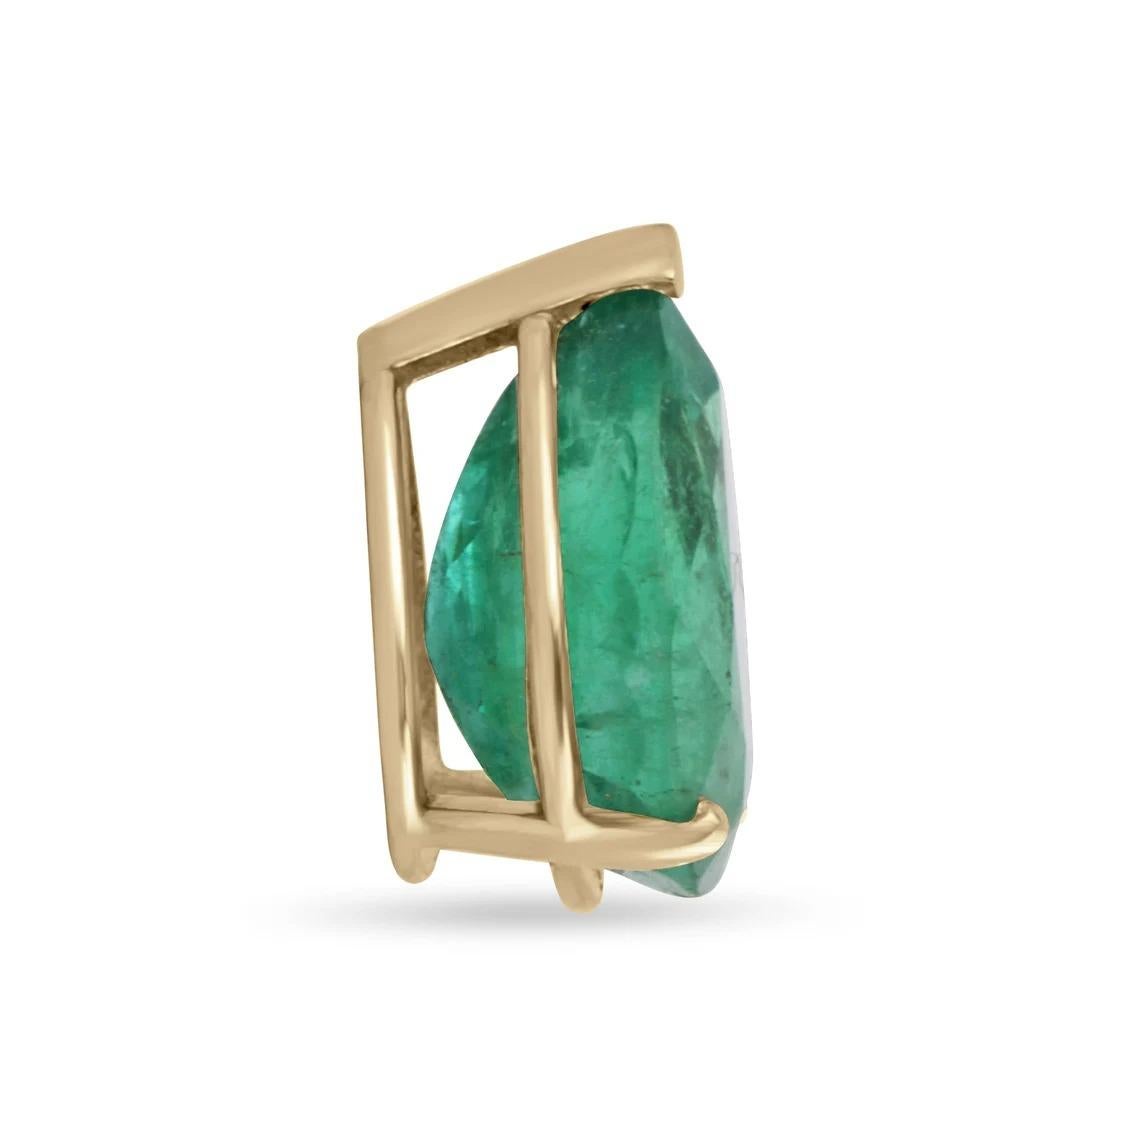 *Chain Sold Separately.

Setting Style: Prong
Setting Material: 14K Yellow Gold
Setting Weight: 1.2 Grams

Main Stone: Emerald
Shape: Pear Cut
Weight: 4.67-Carats
Clarity: Semi-Transparent
Color: Green
Luster: Very Good-Good
Treatments: Natural,